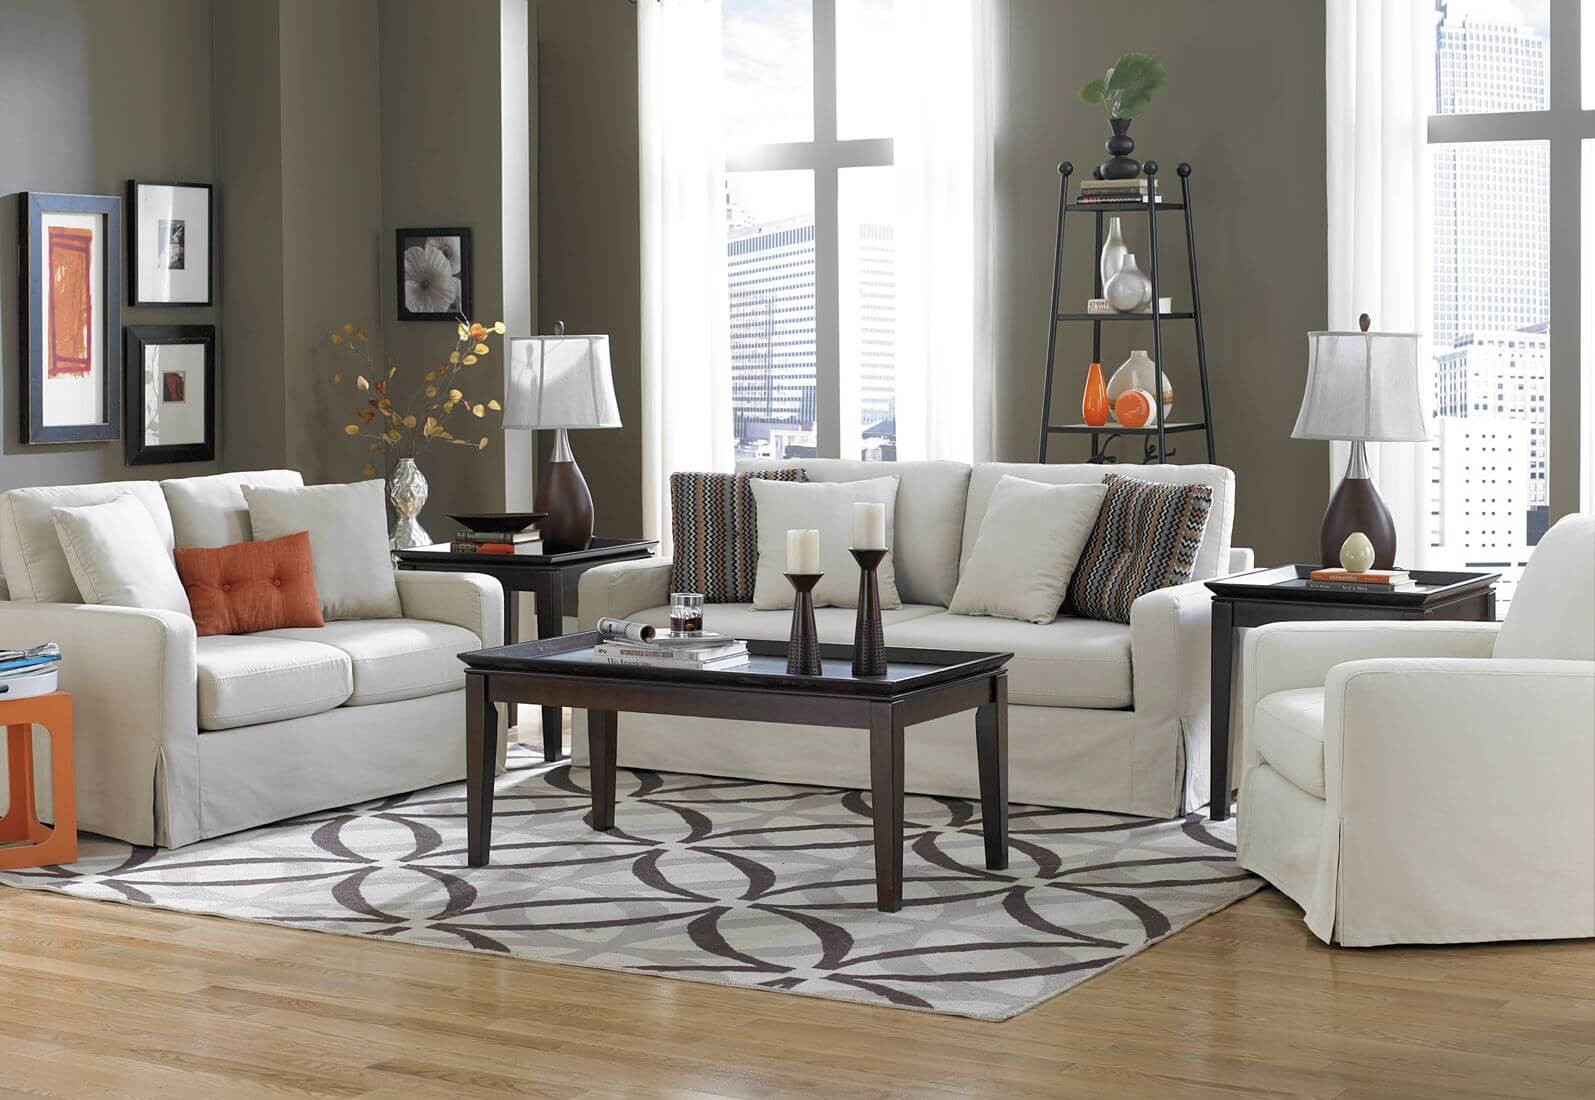 Living Room With Rugs
 40 Living Rooms with Area Rugs for Warmth & Richness